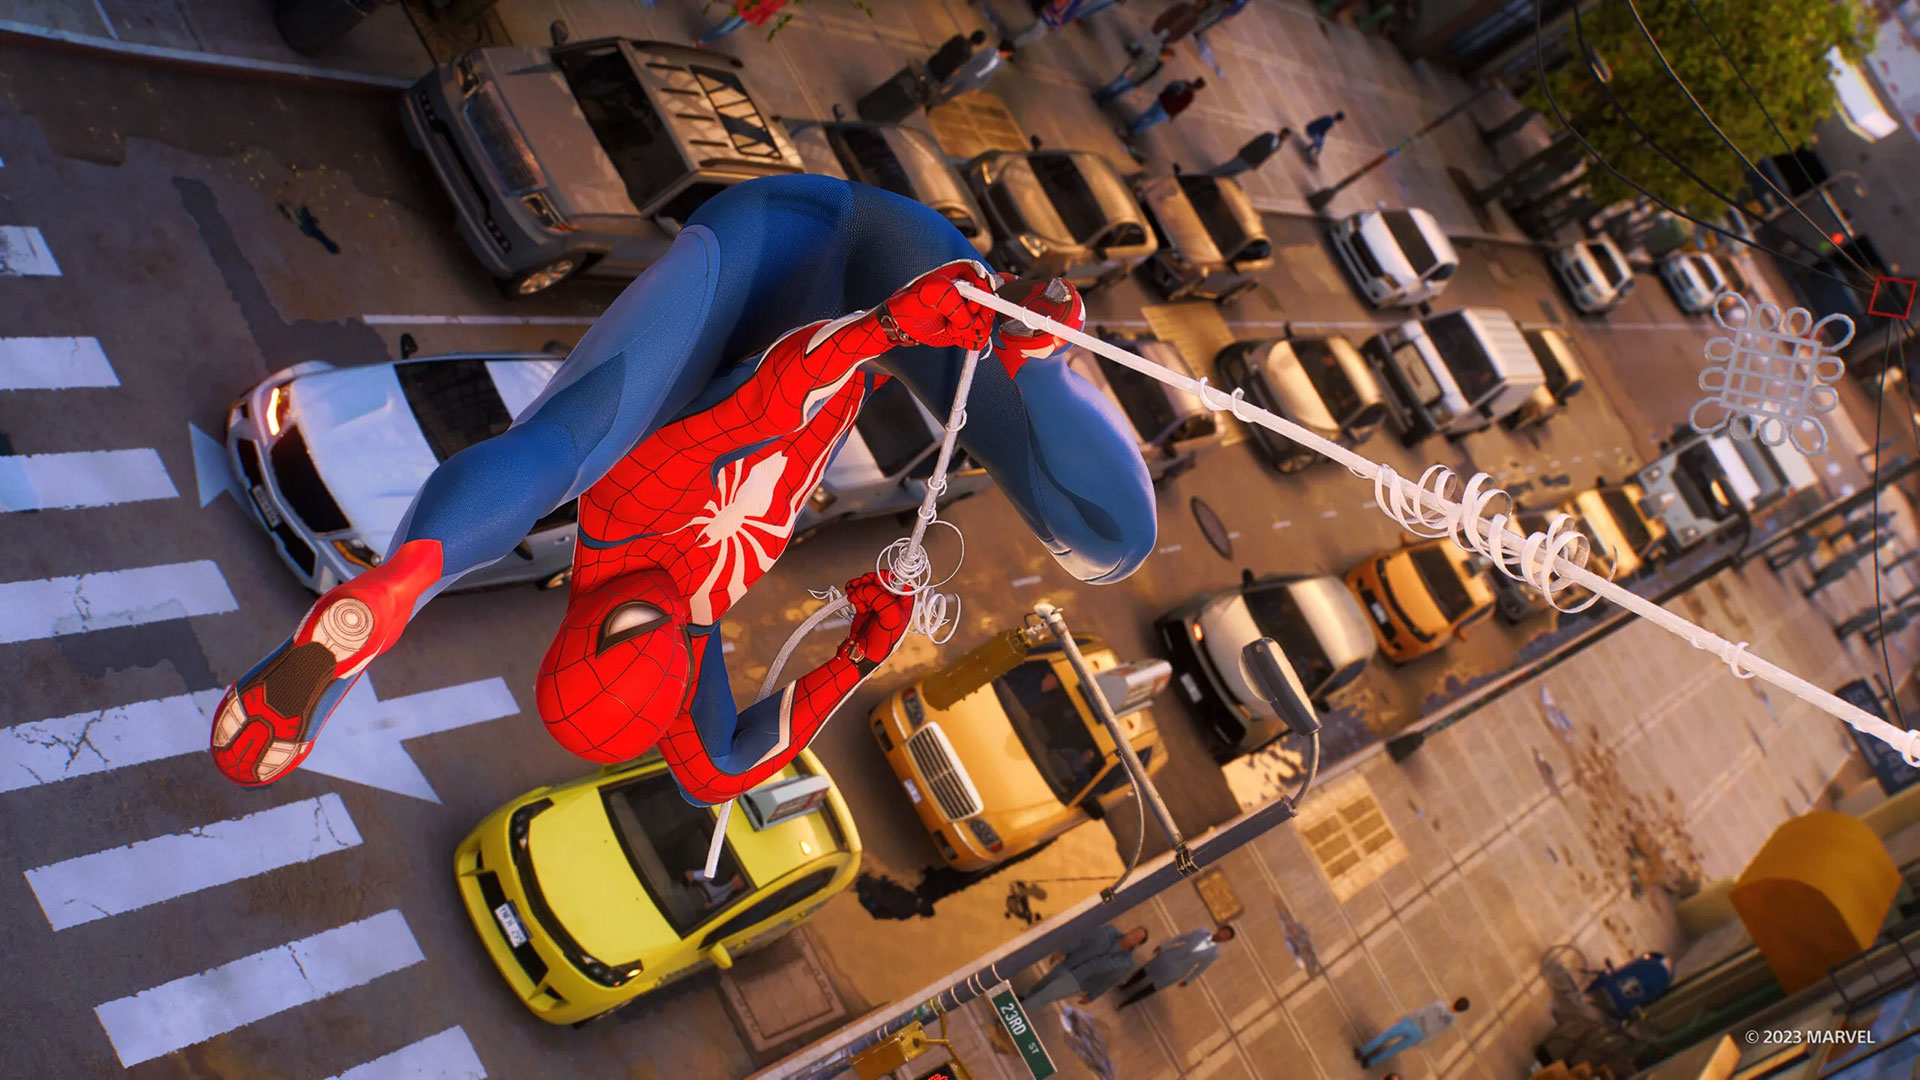 Marvel's Spider-Man 2 will get a major update on March 7